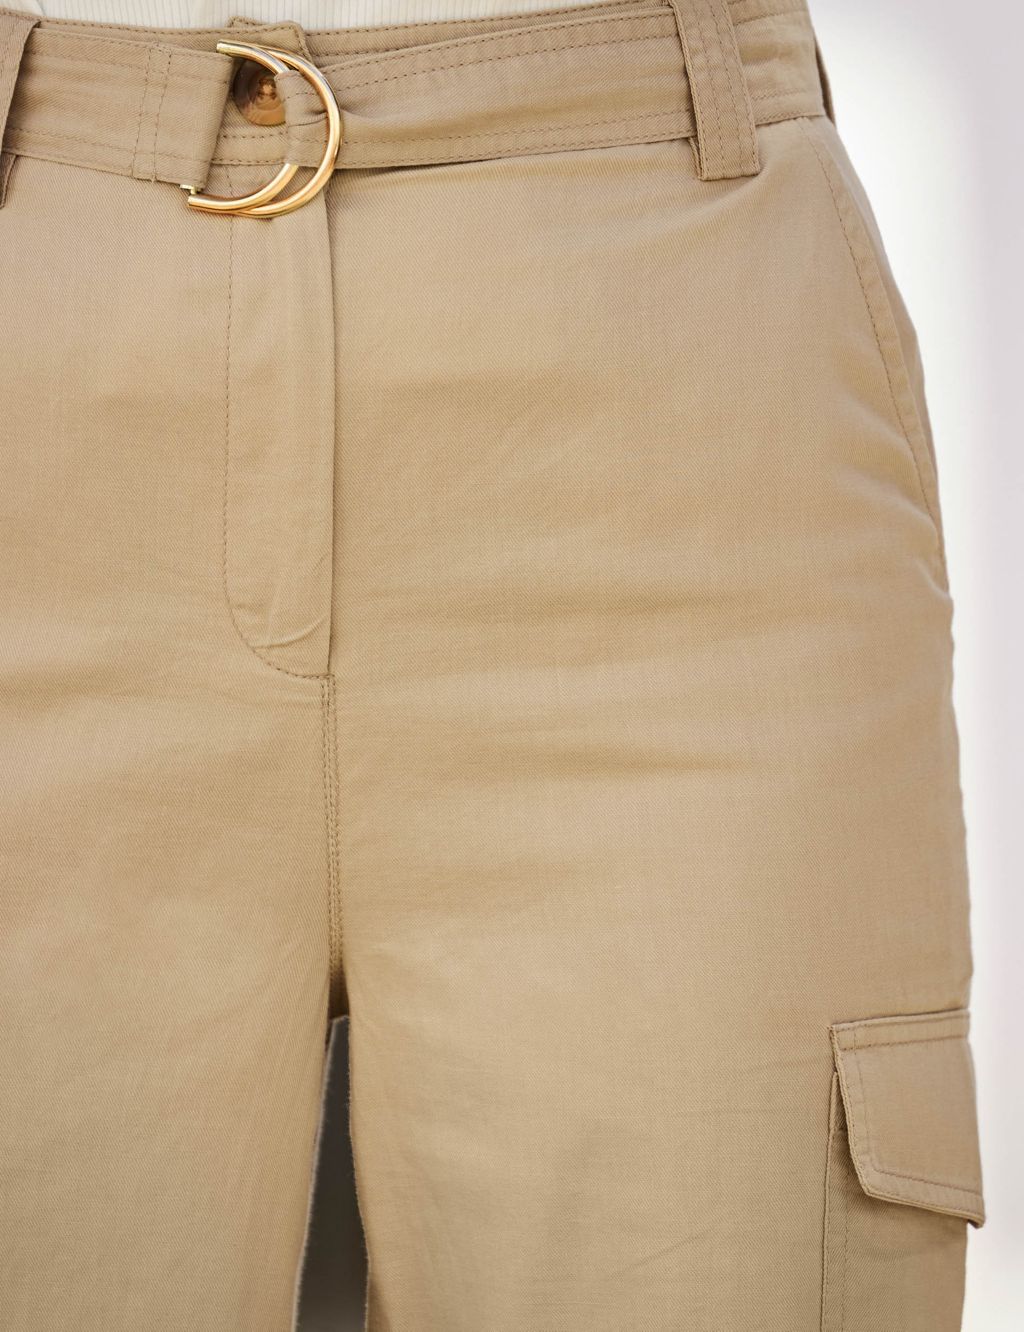 Twill Cargo Belted Tapered Trousers image 5